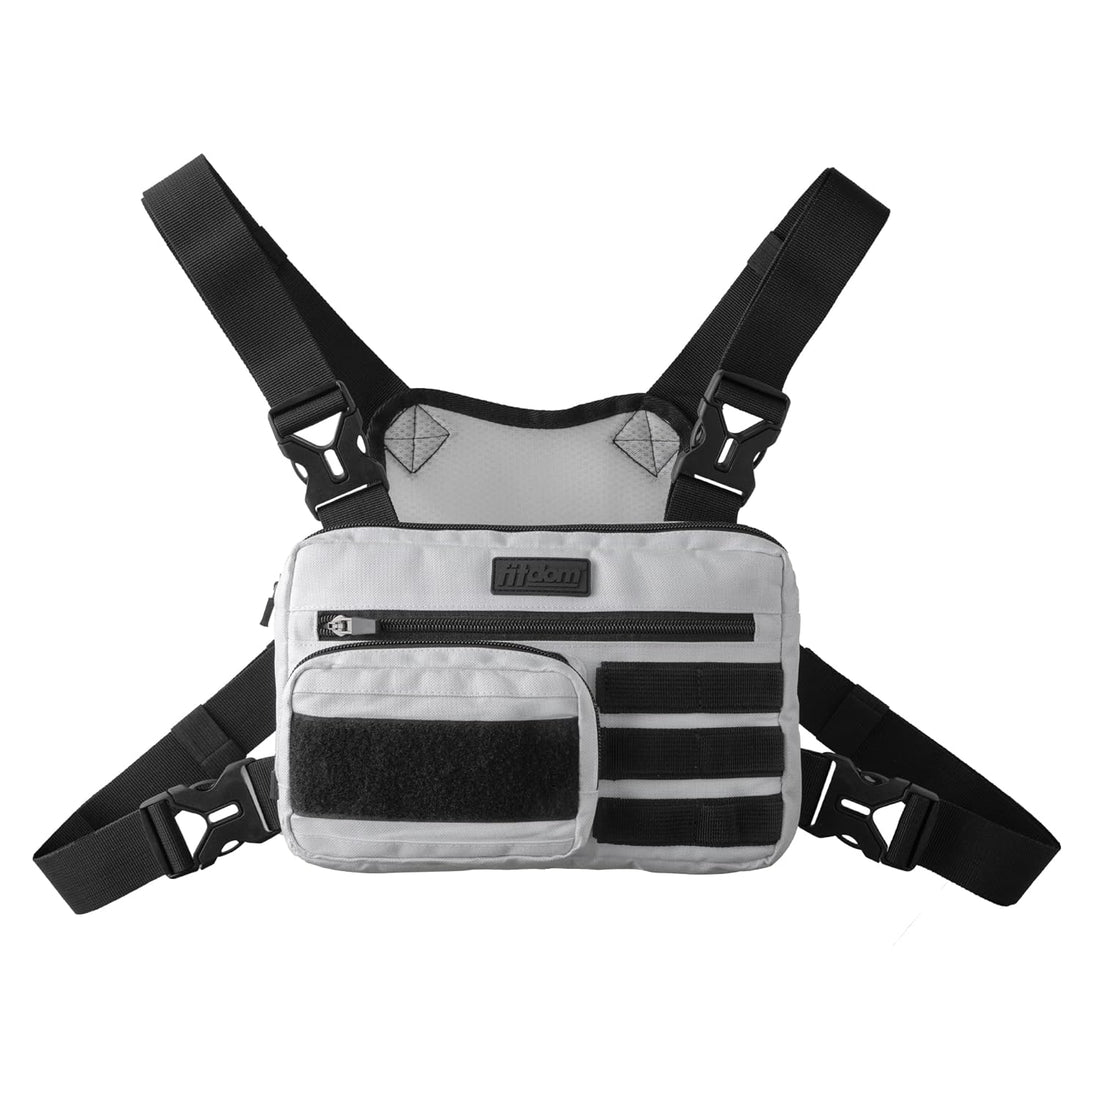 Fitdom Tactical Inspired Sports Utility Chest Pack. Chest Bag For Men With Built-In Phone Holder. This EDC Rig Pouch Vest is Perfect For Workouts, Cycling & Hiking (Rig Fit, White)